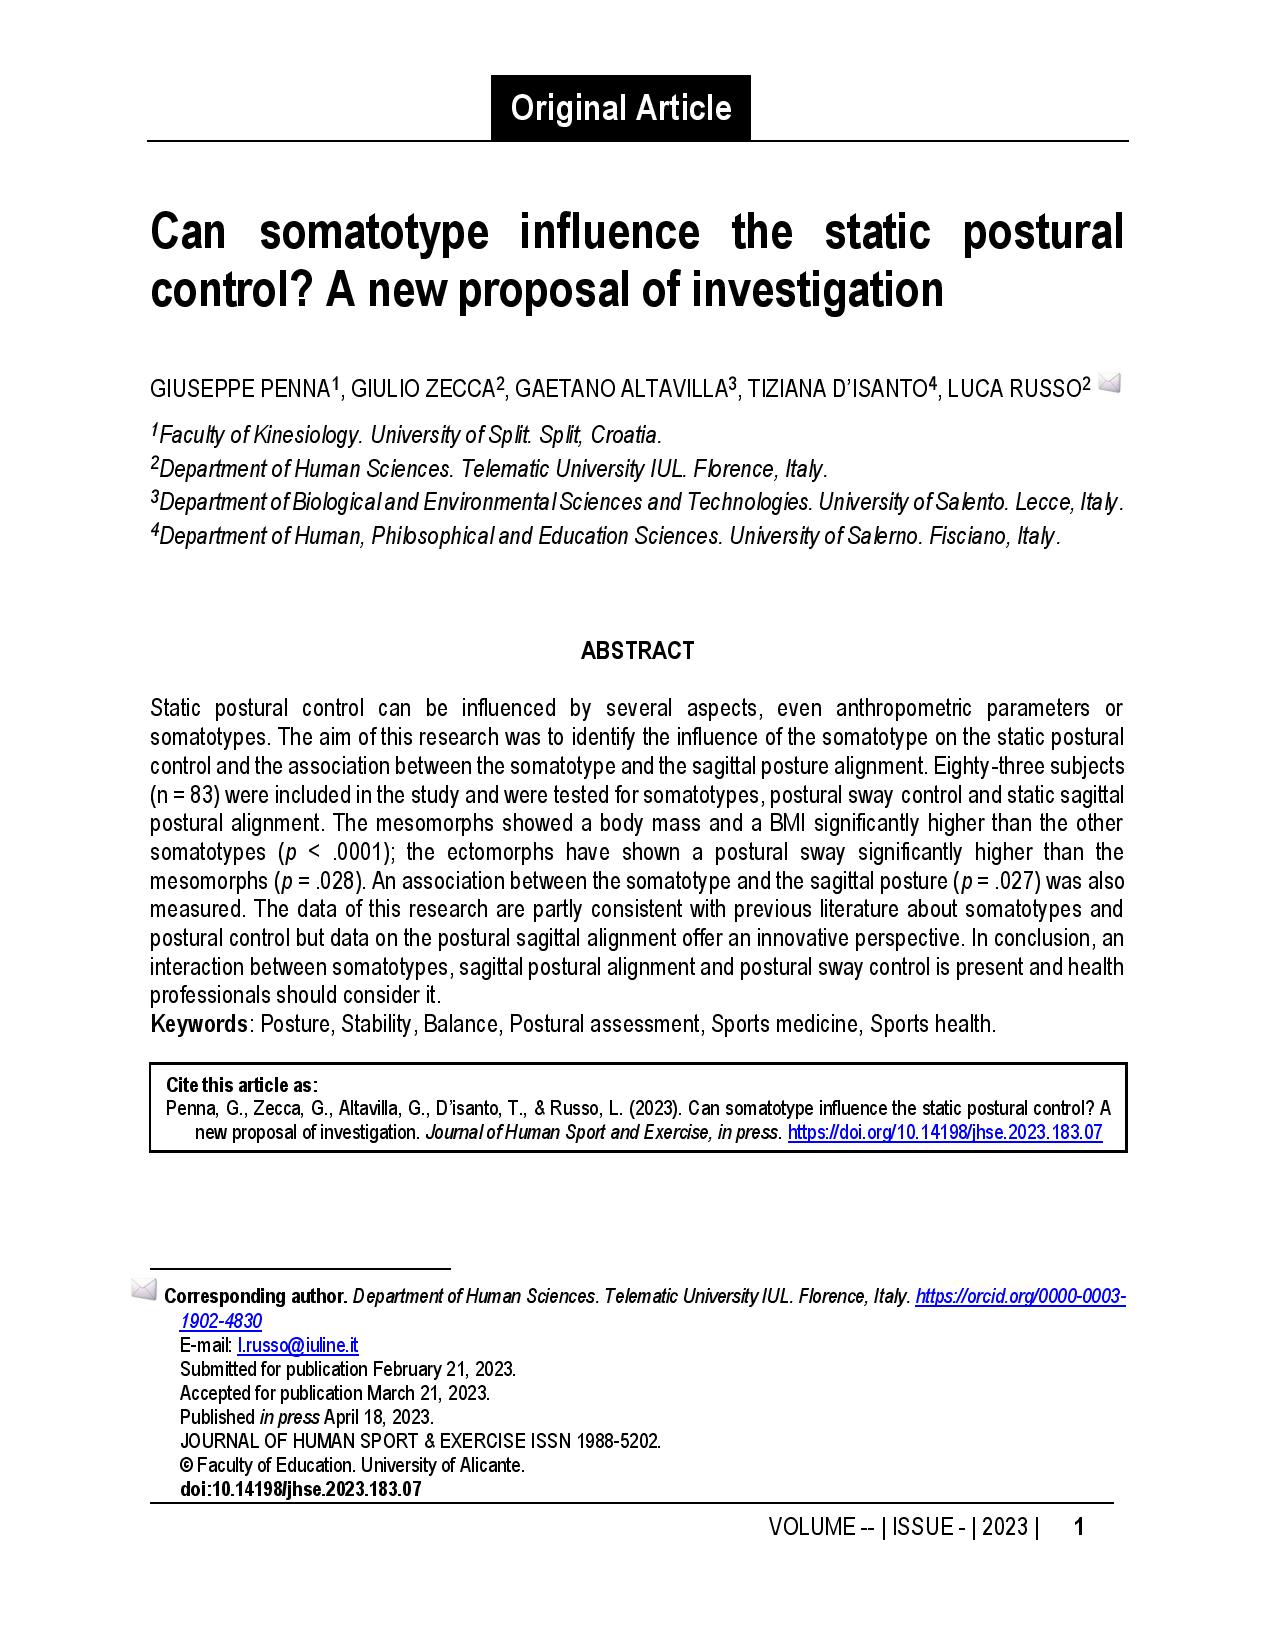 Can somatotype influence the static postural control? A new proposal of investigation